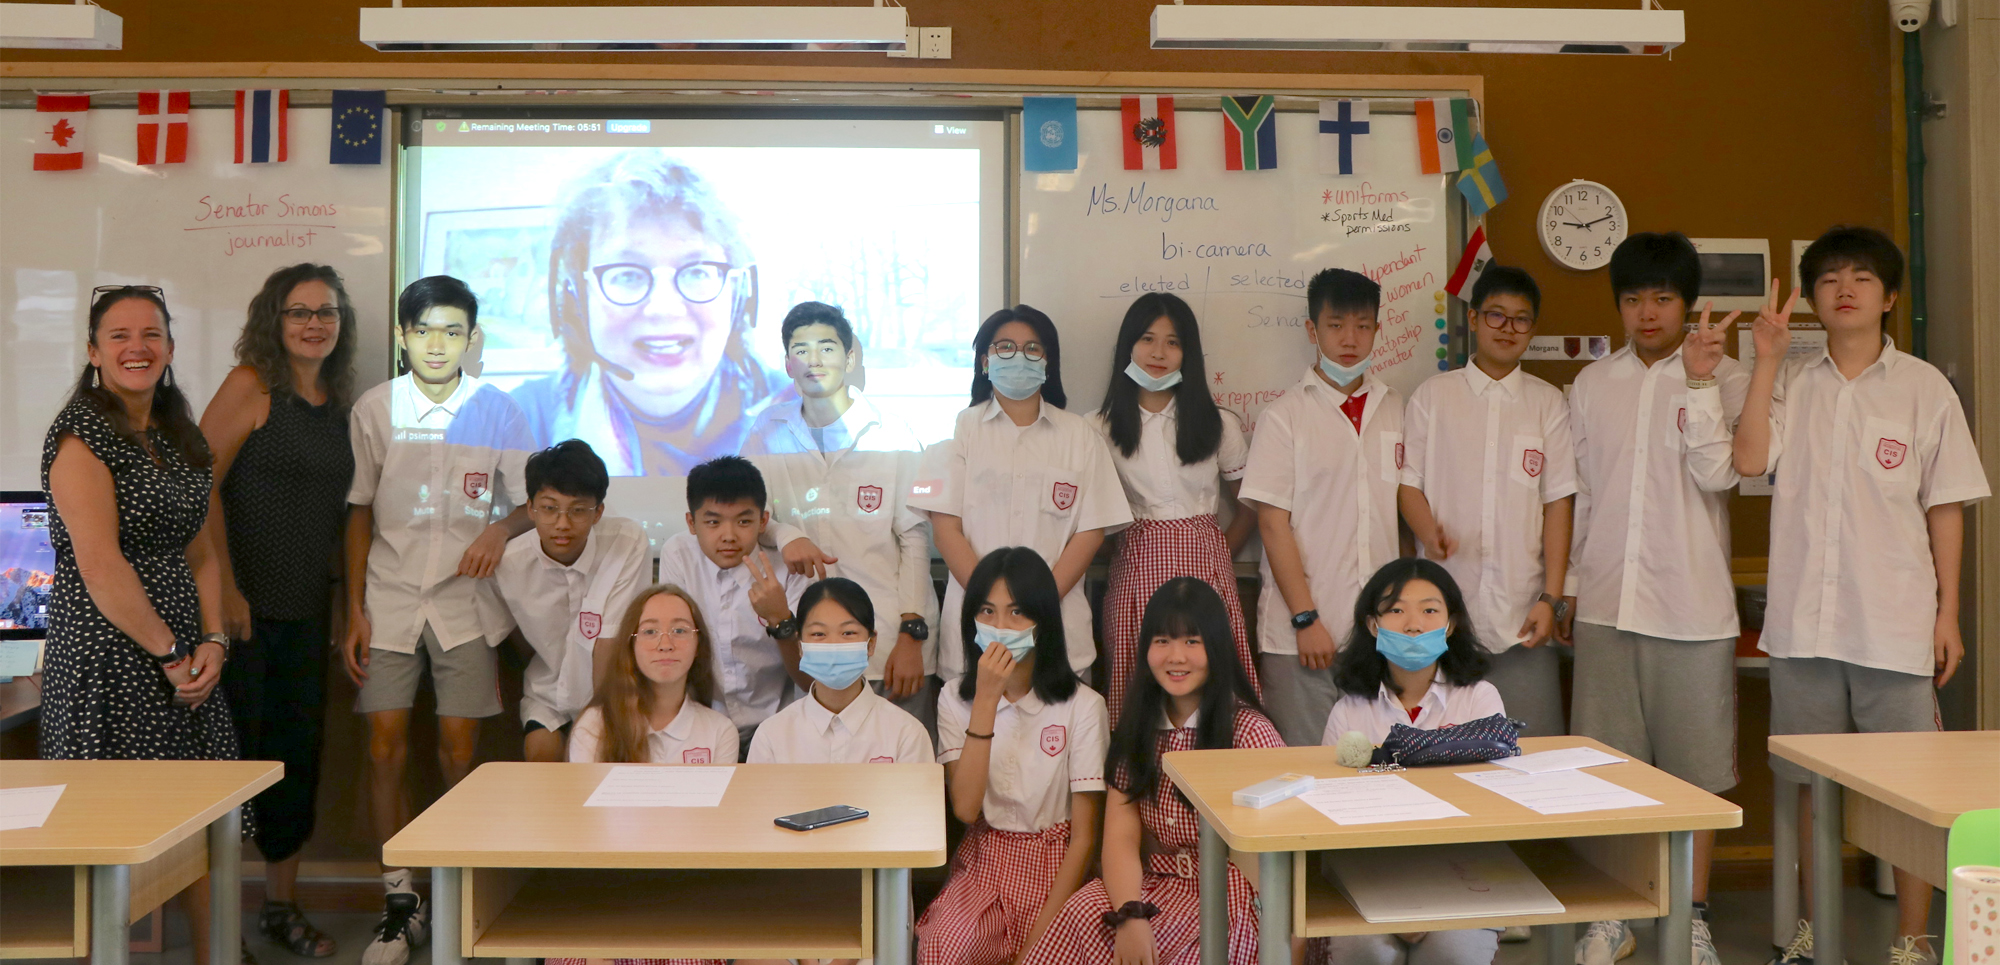 Monday, September 14, 2020 — Senator Paula Simons speaks with Grade 9 students in a videoconference at the Canadian International School in Guangzhou, China. Senator Simons spoke about her work as a senator and the role of the Senate in Canadian democracy.